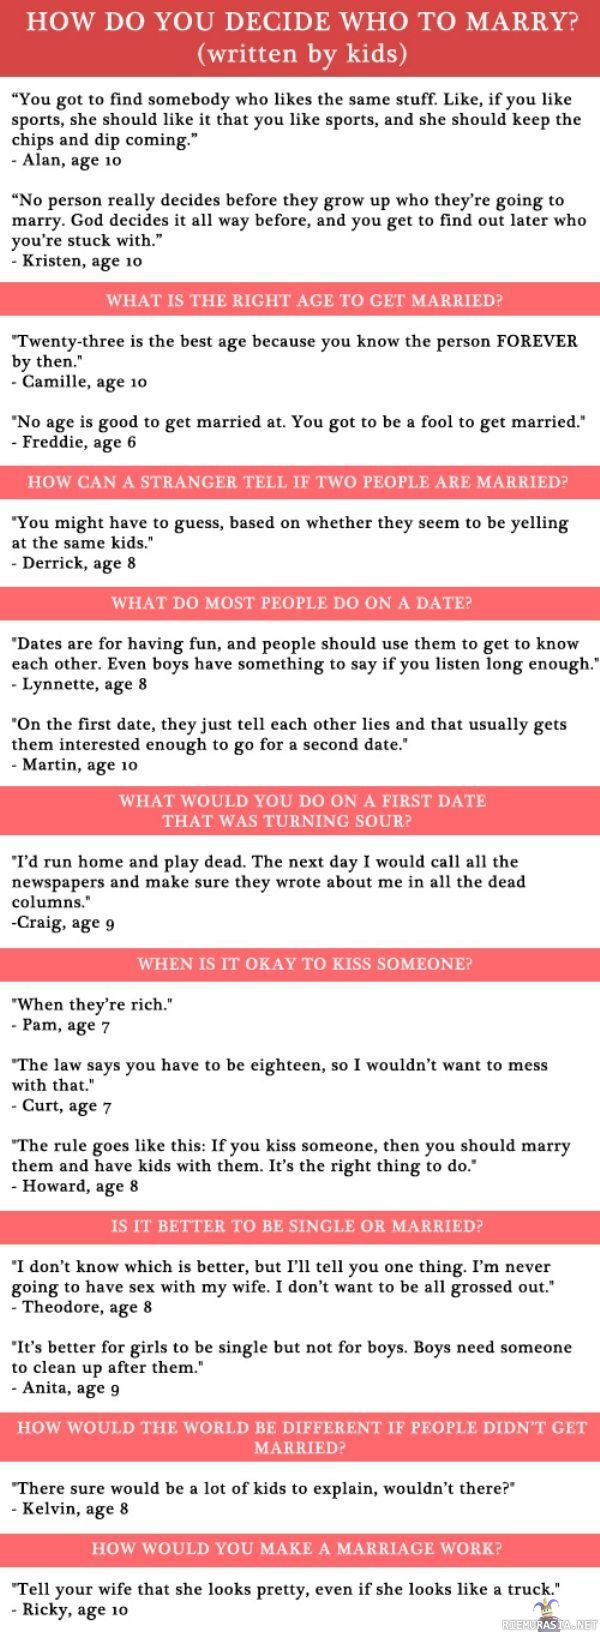 Kids talk about dating